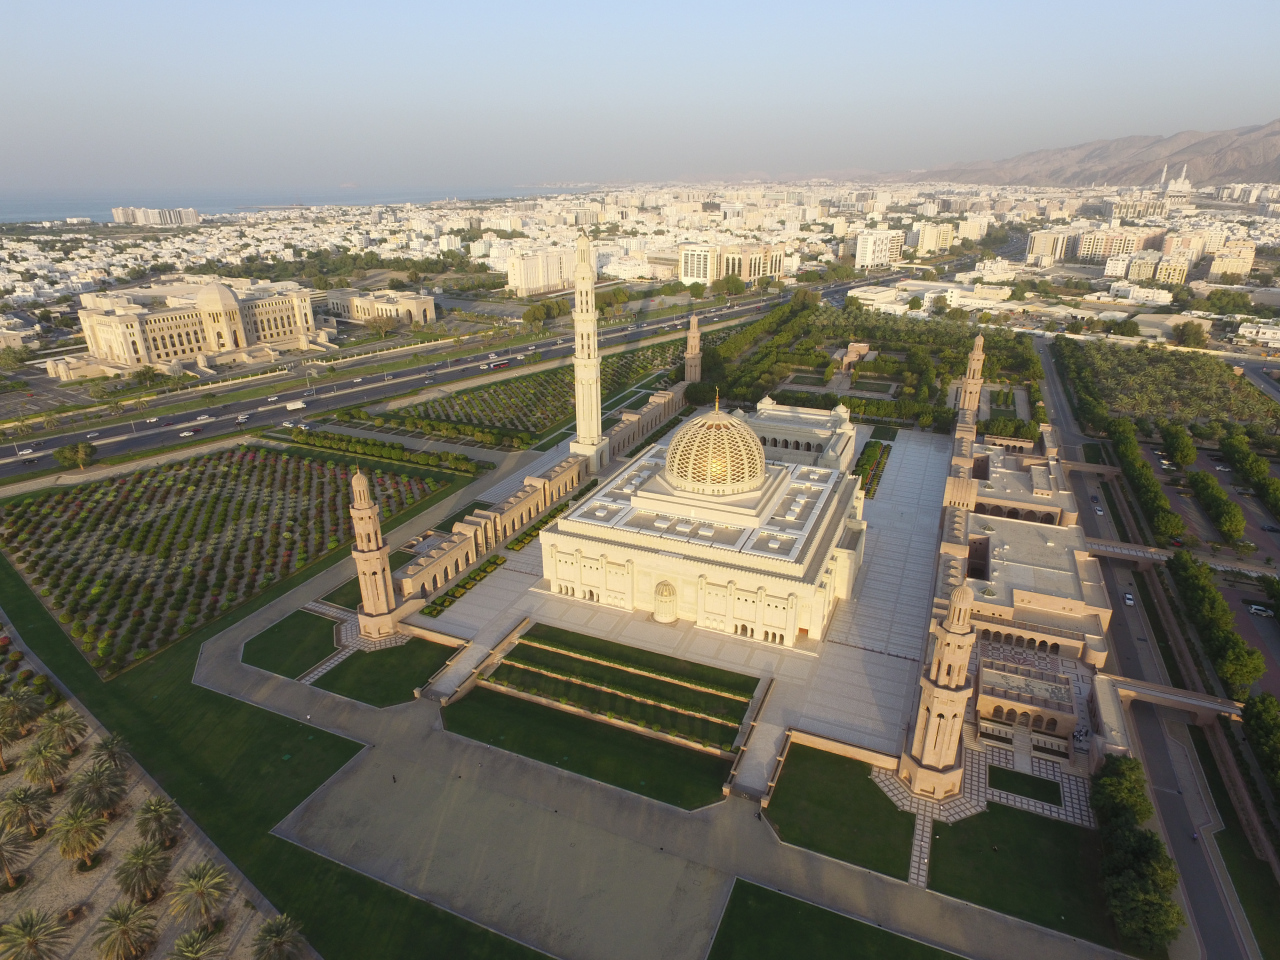 The Grand Mosque in Muscat, Oman